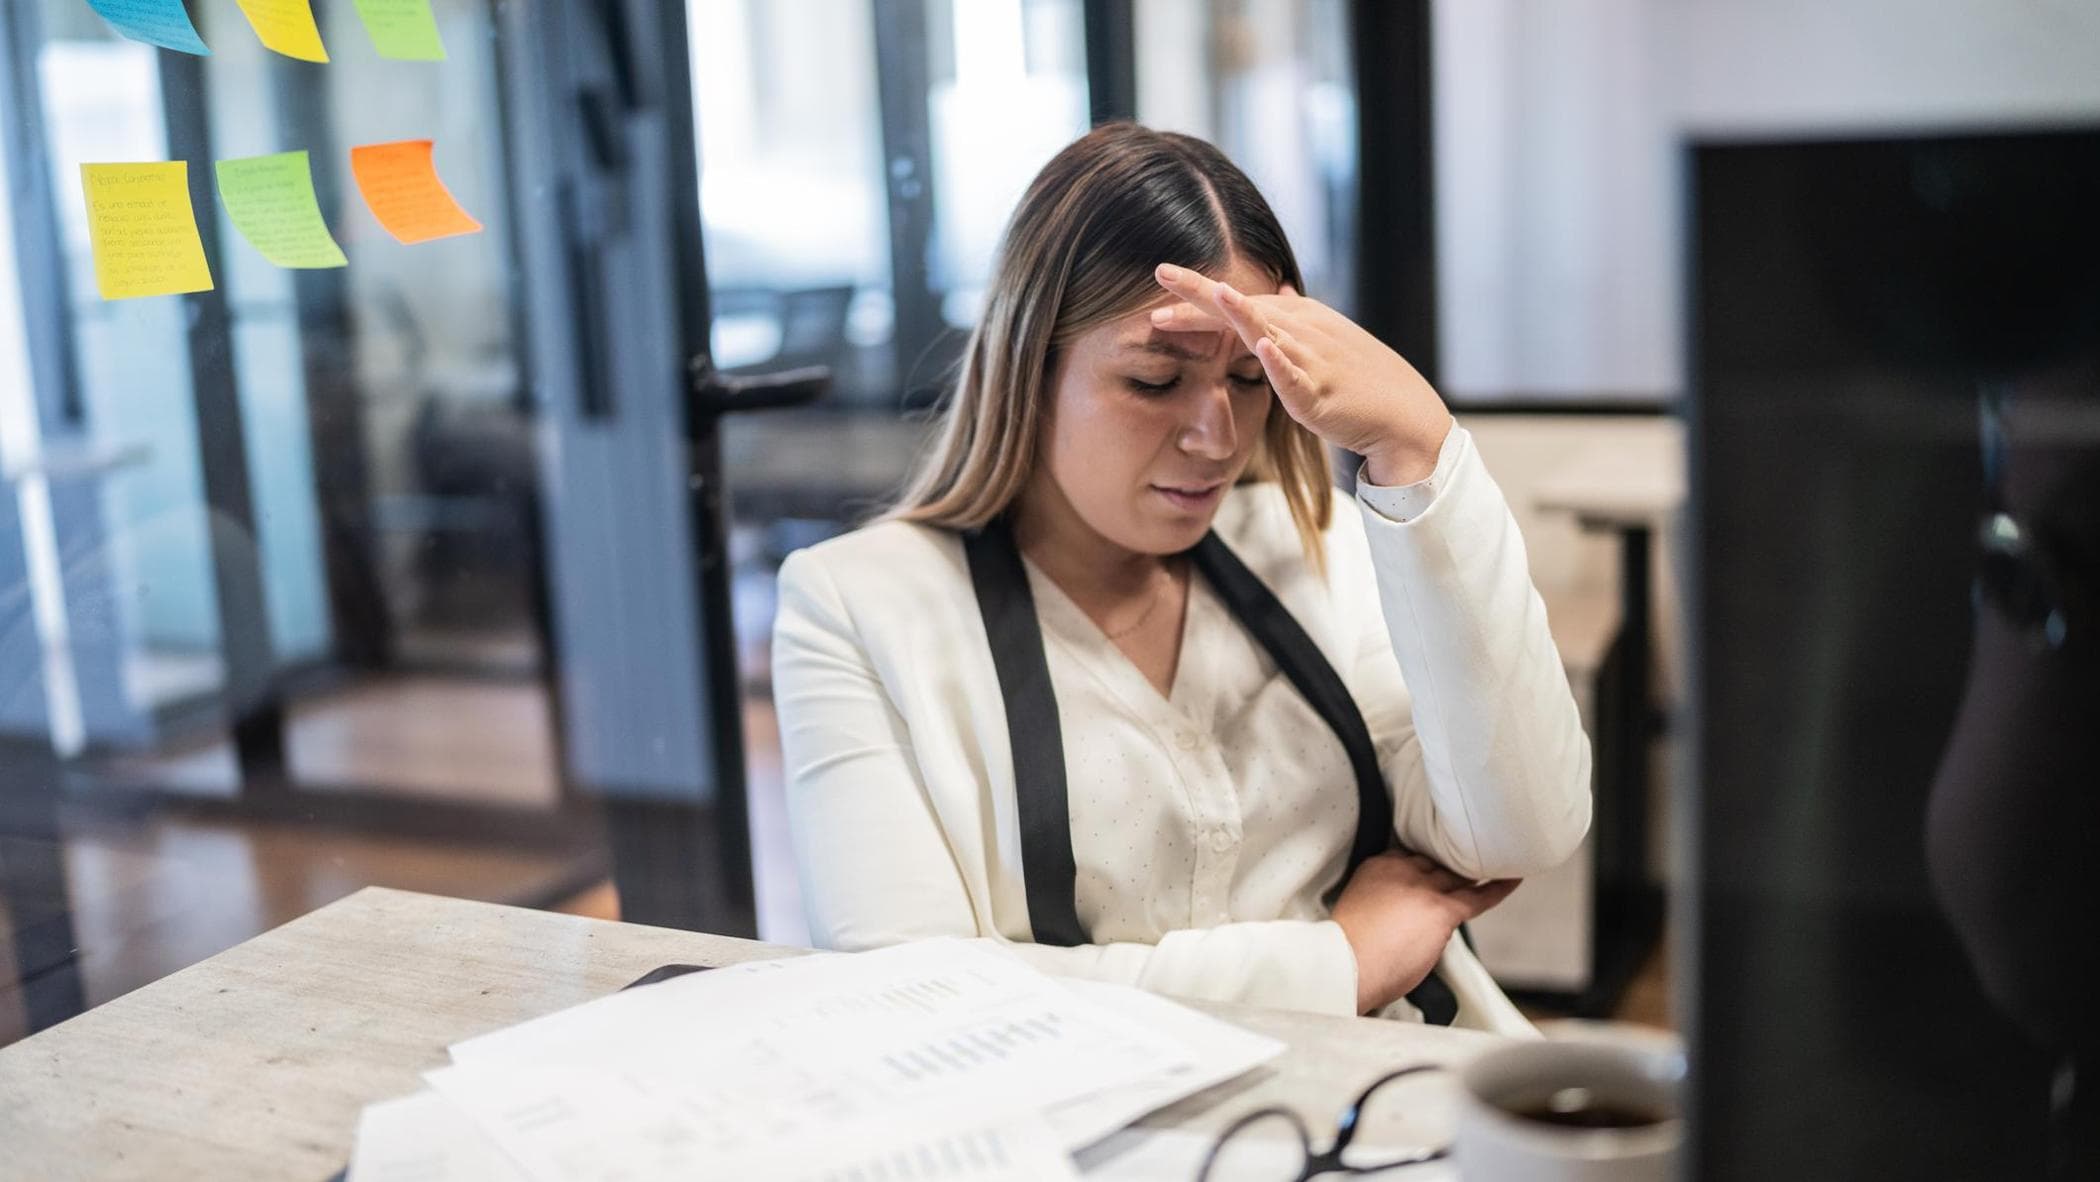 Work Exhaustion 20 of Workers Suffer from Burnout